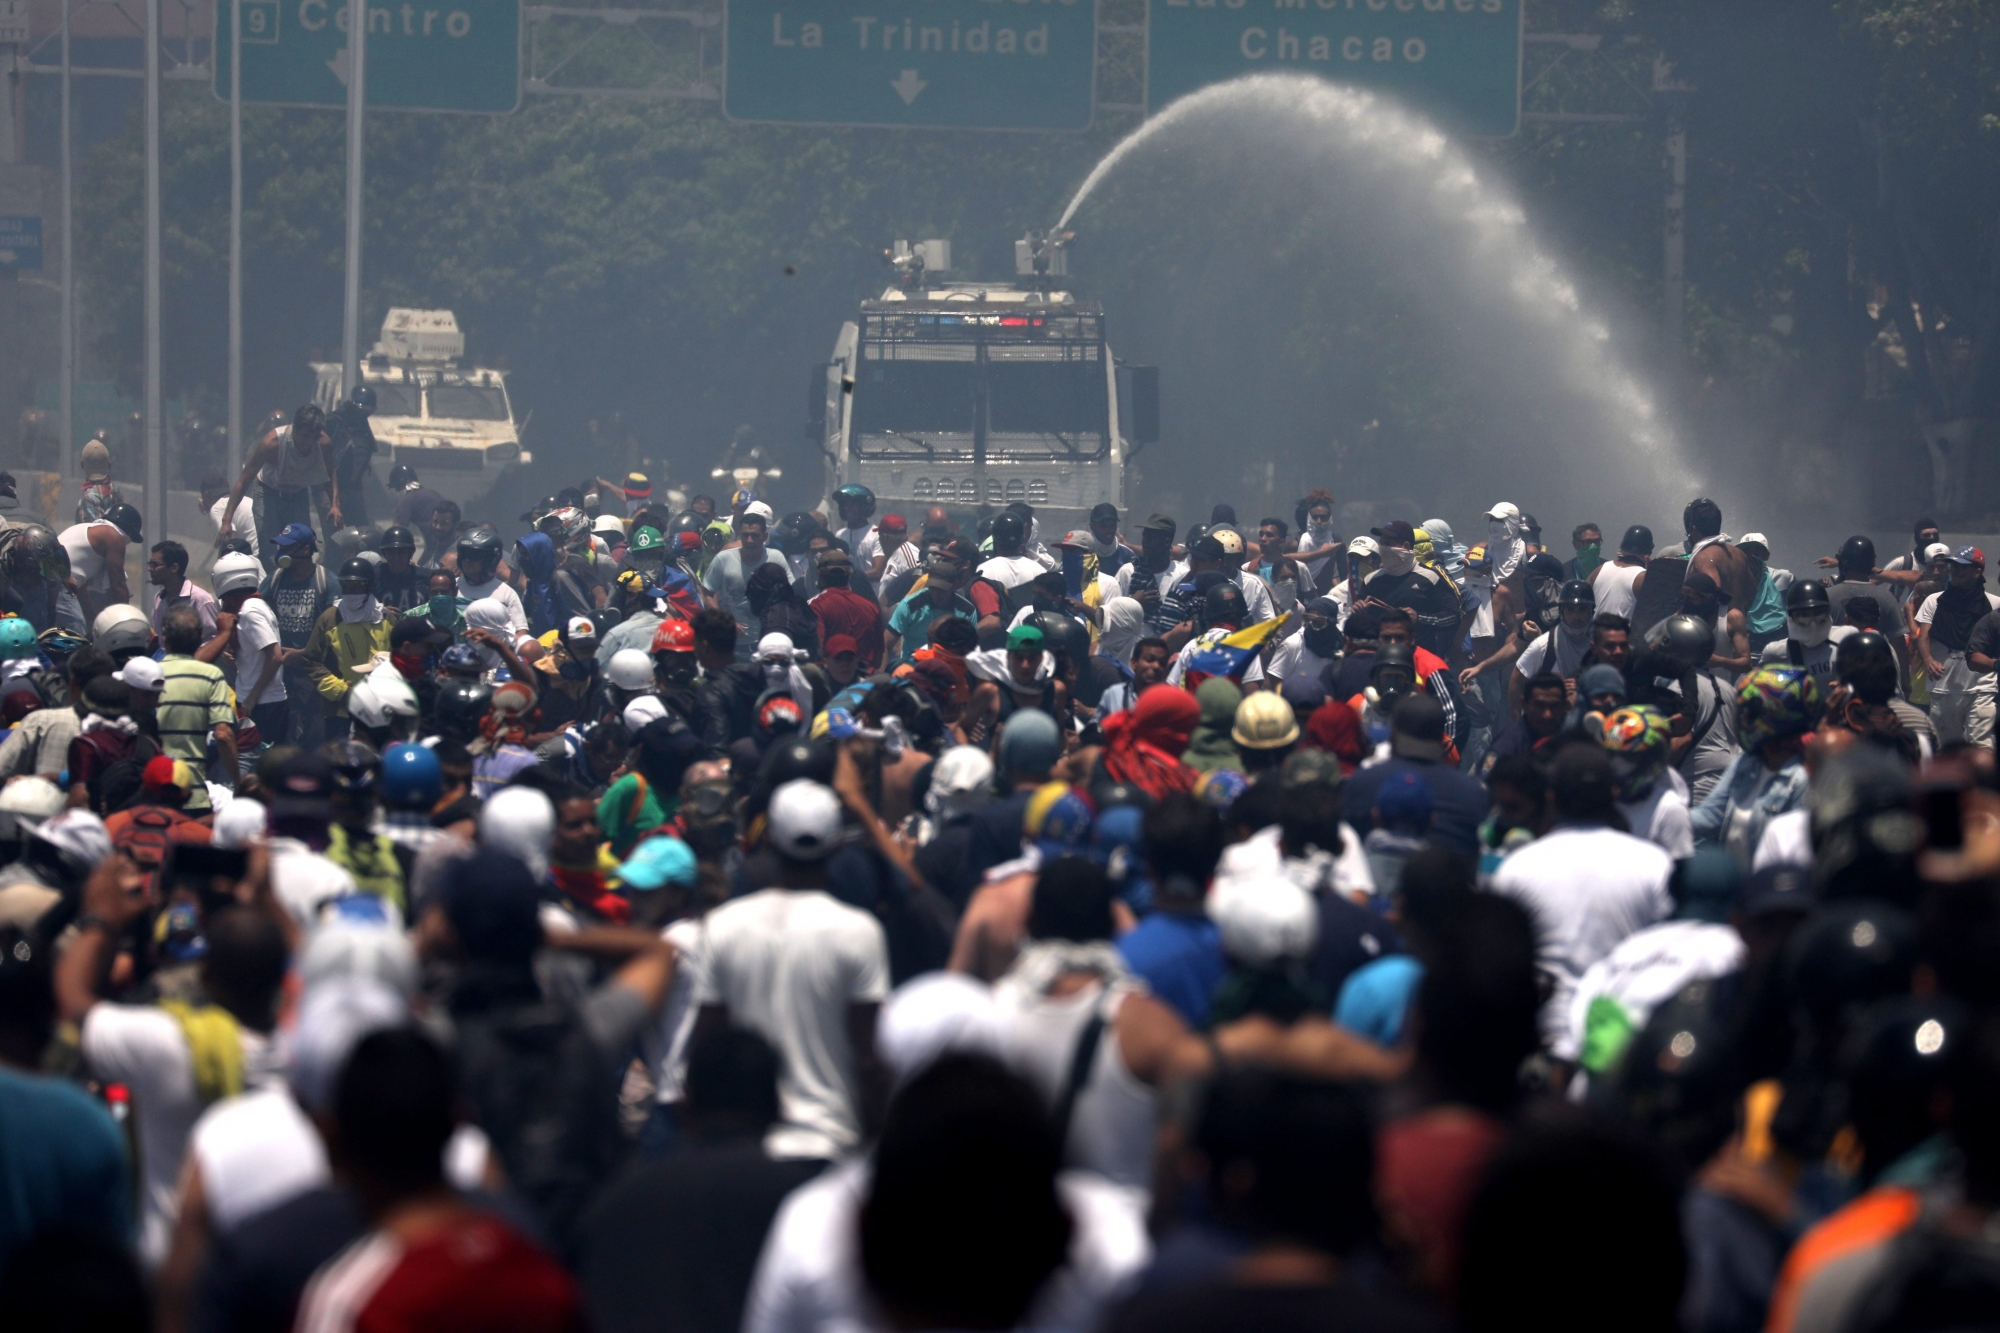 epaselect epa07538456 Supporters of President of the Venezuelan Parliament confront armored trucks of the Bolivarian Armed Forces during a protest at the Altamira area, in Caracas, Venezuela, 30 April 2019. Venezuelan interim President Juan Guaido has asked supporters to take to the streets in order to end the regime of President Nicolas Maduro. Meanwhile, Venezuelan opposition leader Leopoldo Lopez was freed from his house arrest, appearing alongside Guaido and military forces in Caracas.  EPA/Miguel Gutierrez epaselect VENEZUELA CRISIS